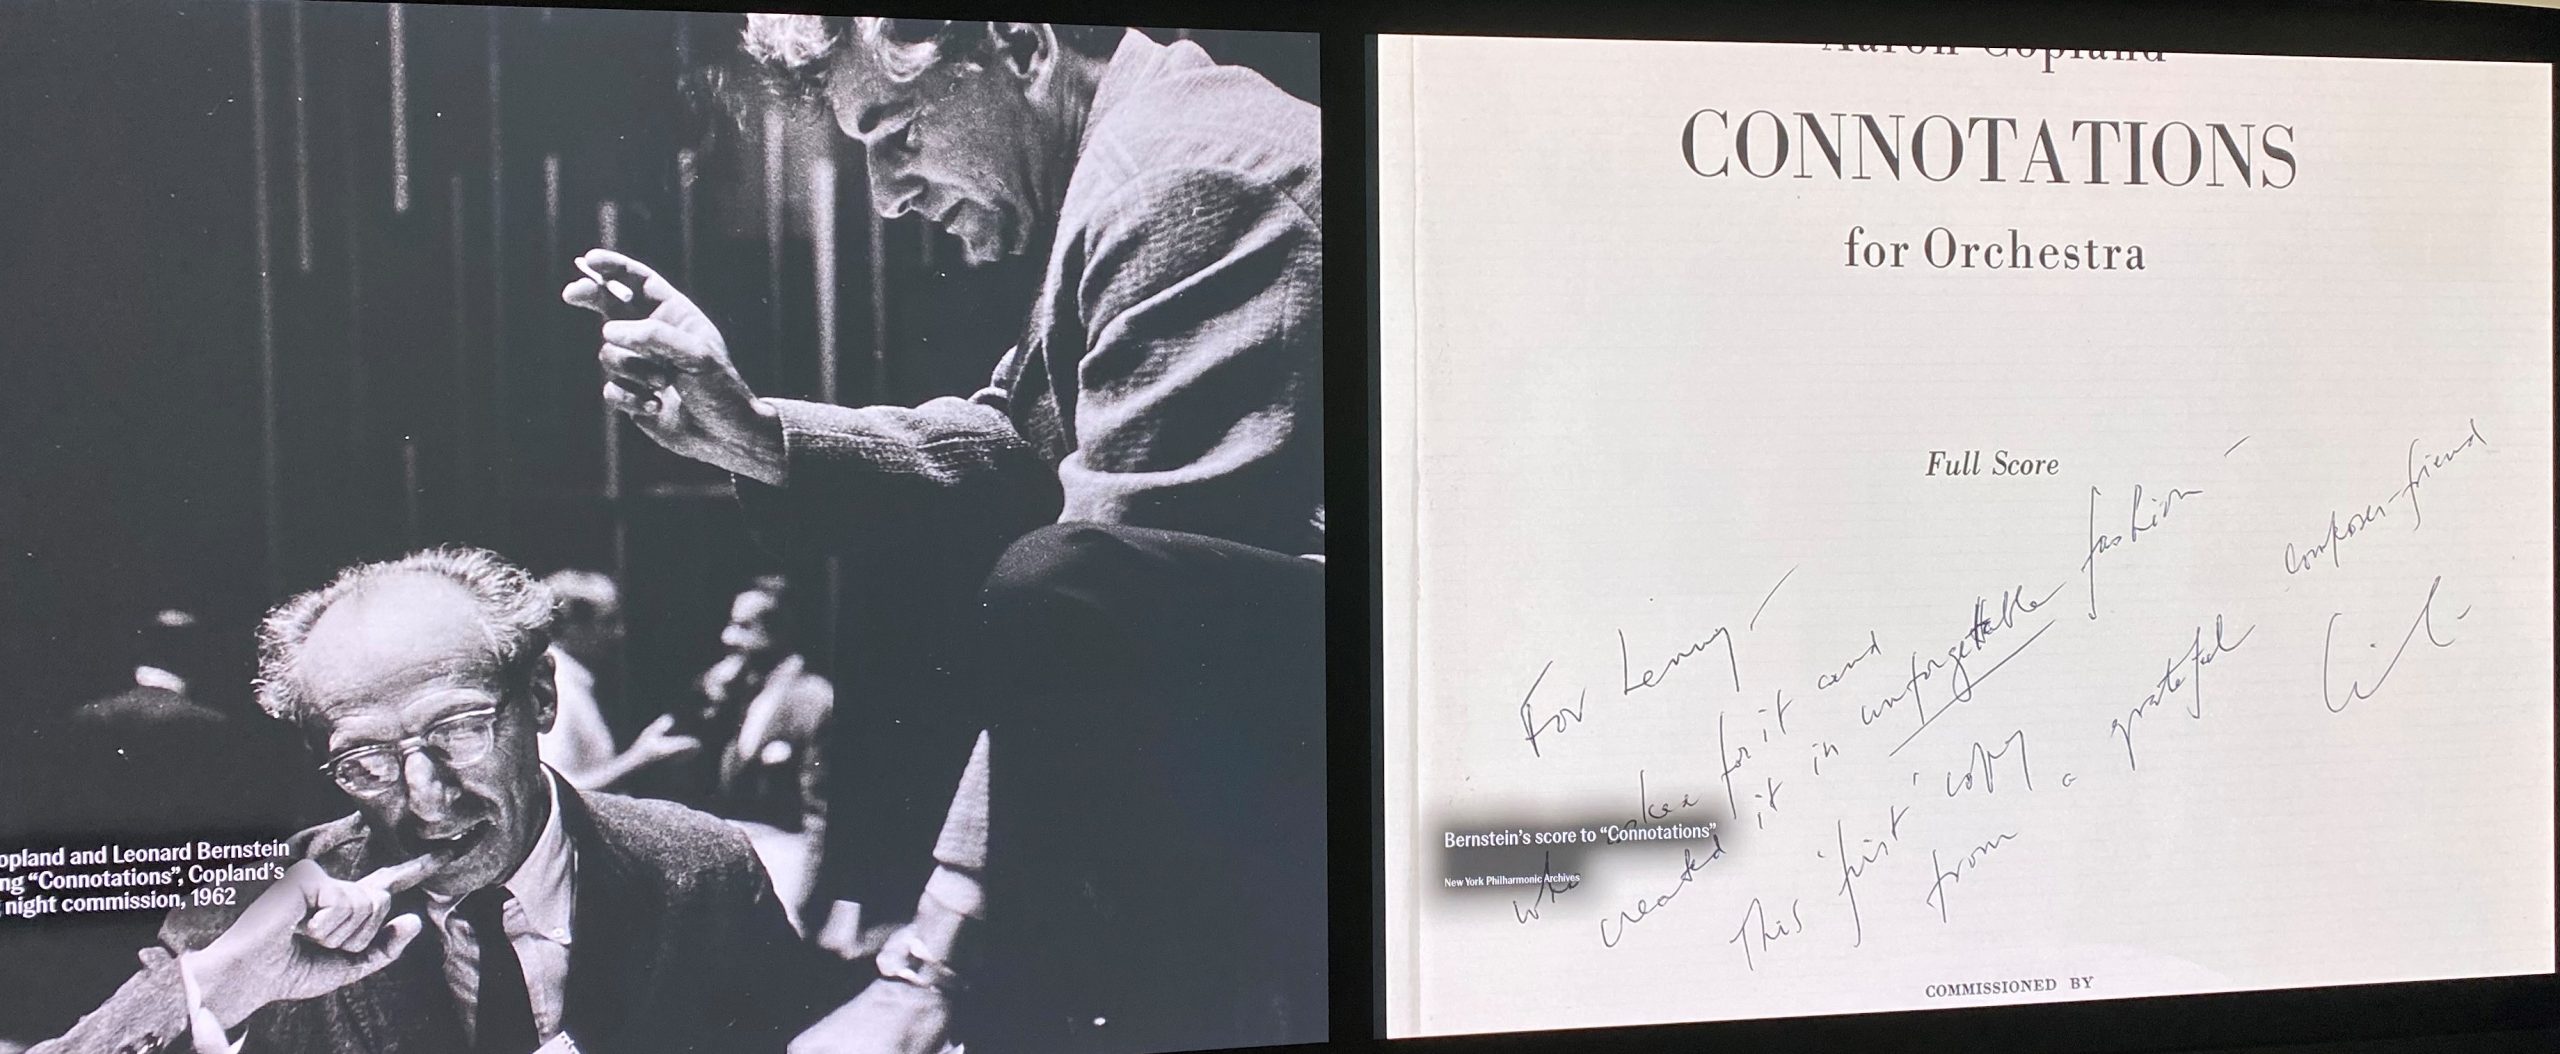 Picture montage of Aaron Copland listening to Leonard Bernstein with a score of Connotations for Orchestra